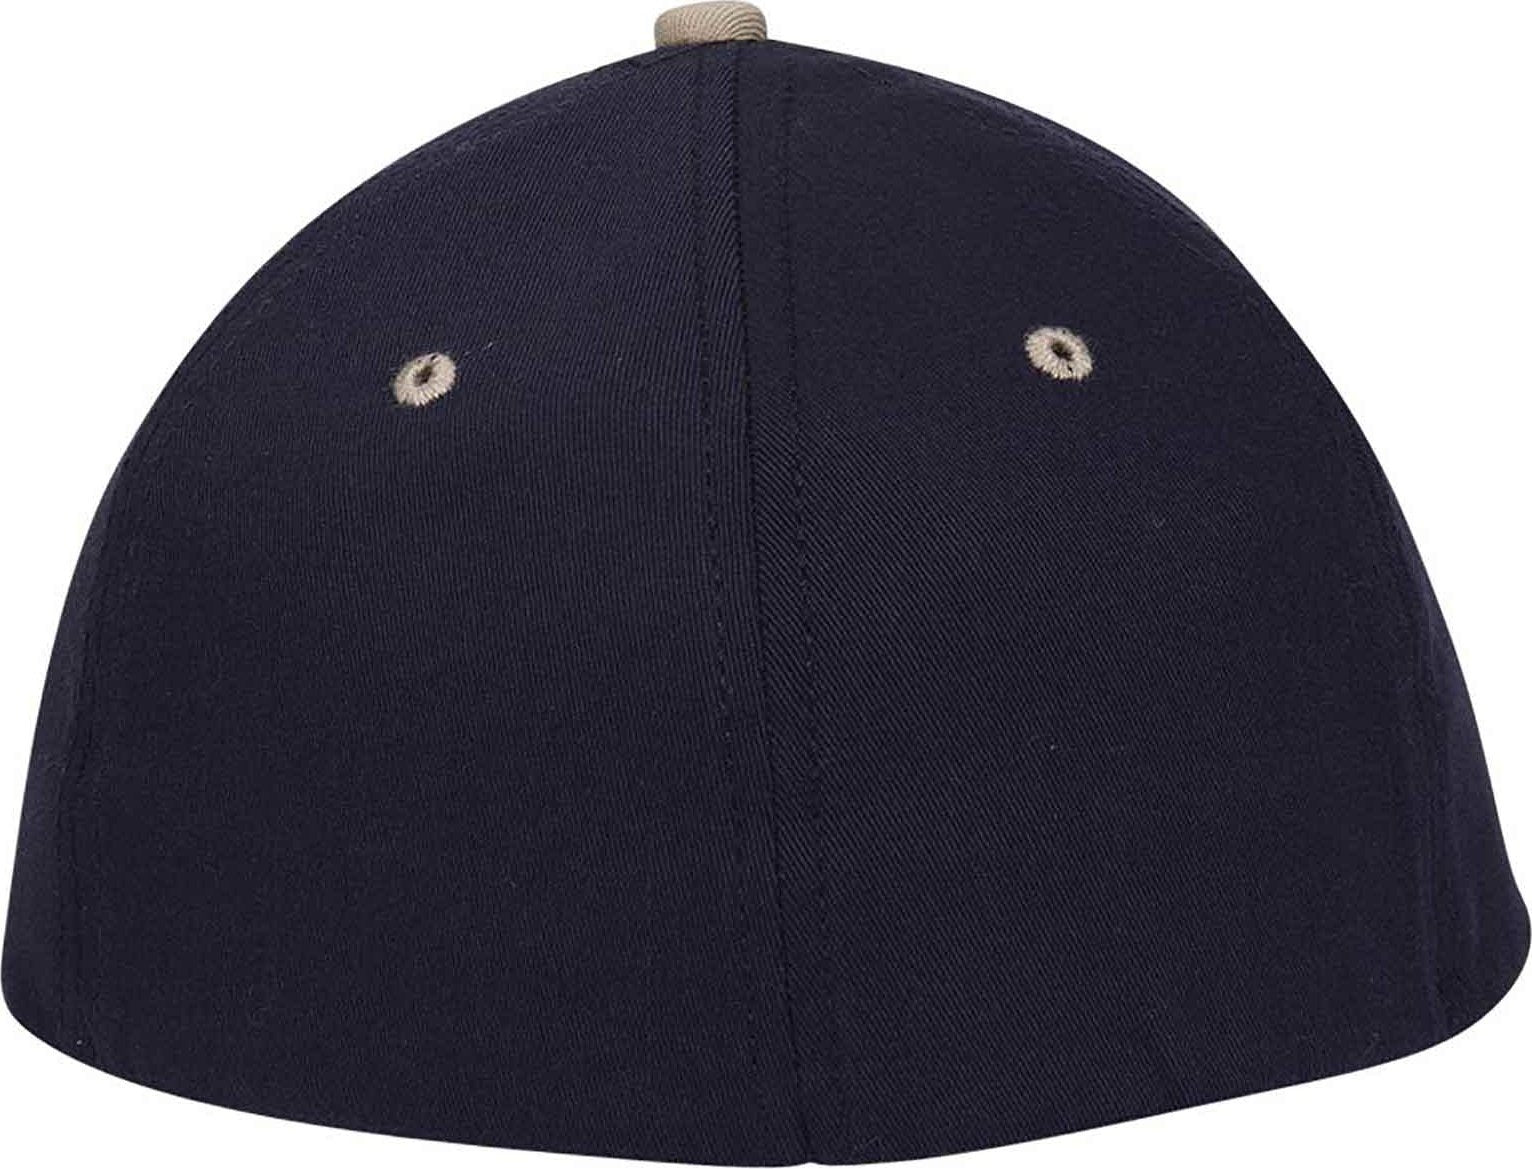 OTTO 12-267 Stretchable Deluxe Brushed Cotton Twill Sandwich Visor Low Profile Pro Style Cap S/M - Navy Navy Khaki - HIT a Double - 1